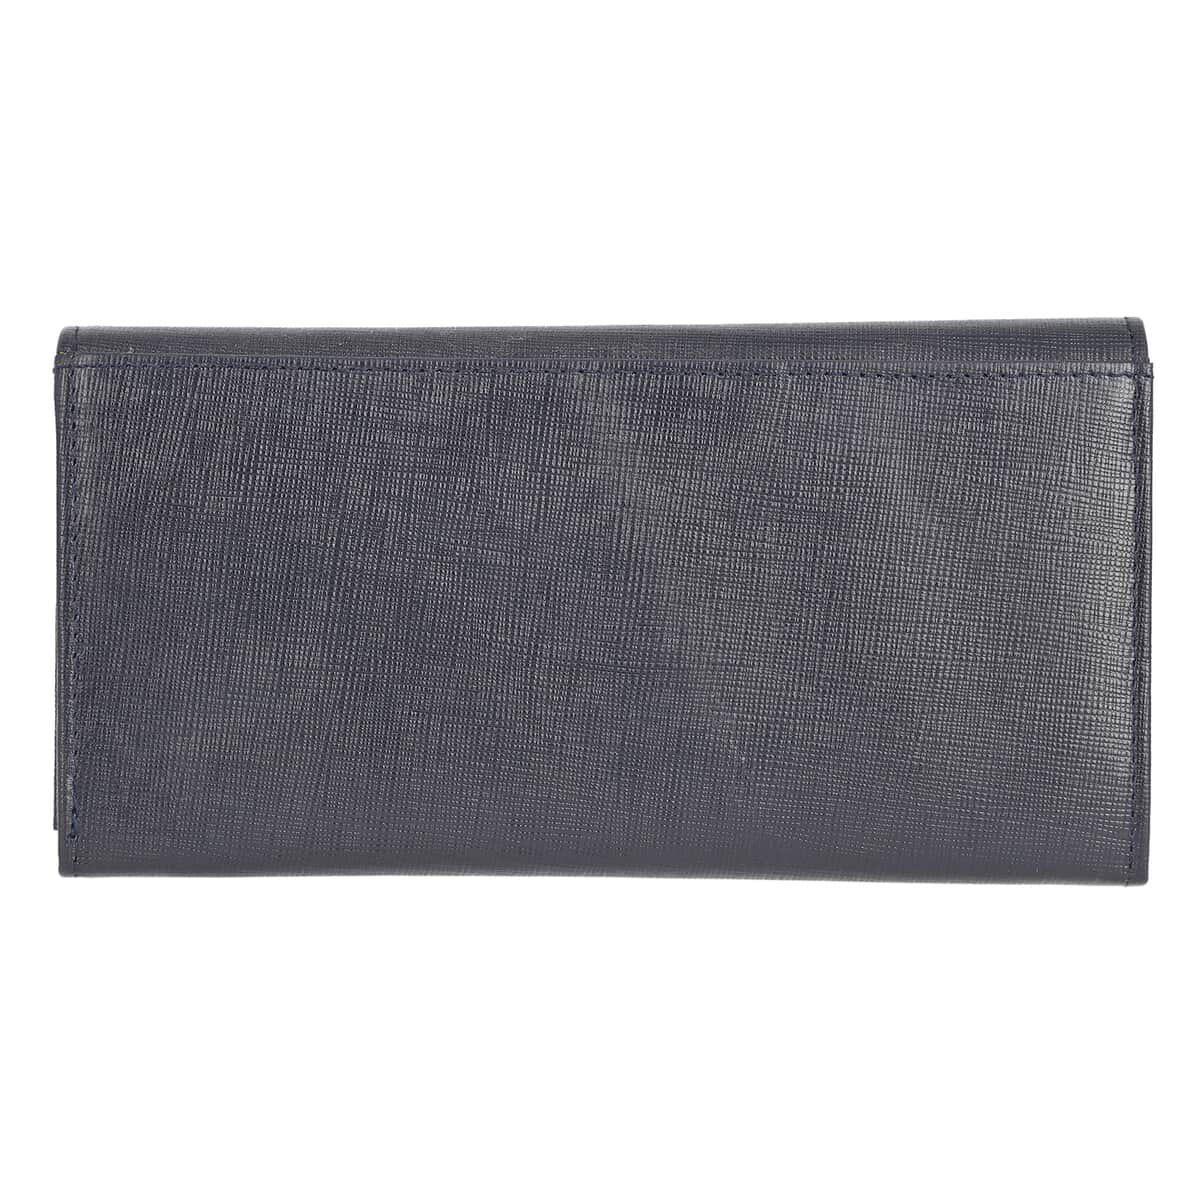 Union Code Navy Genuine Leather RFID Women's Wallet image number 6